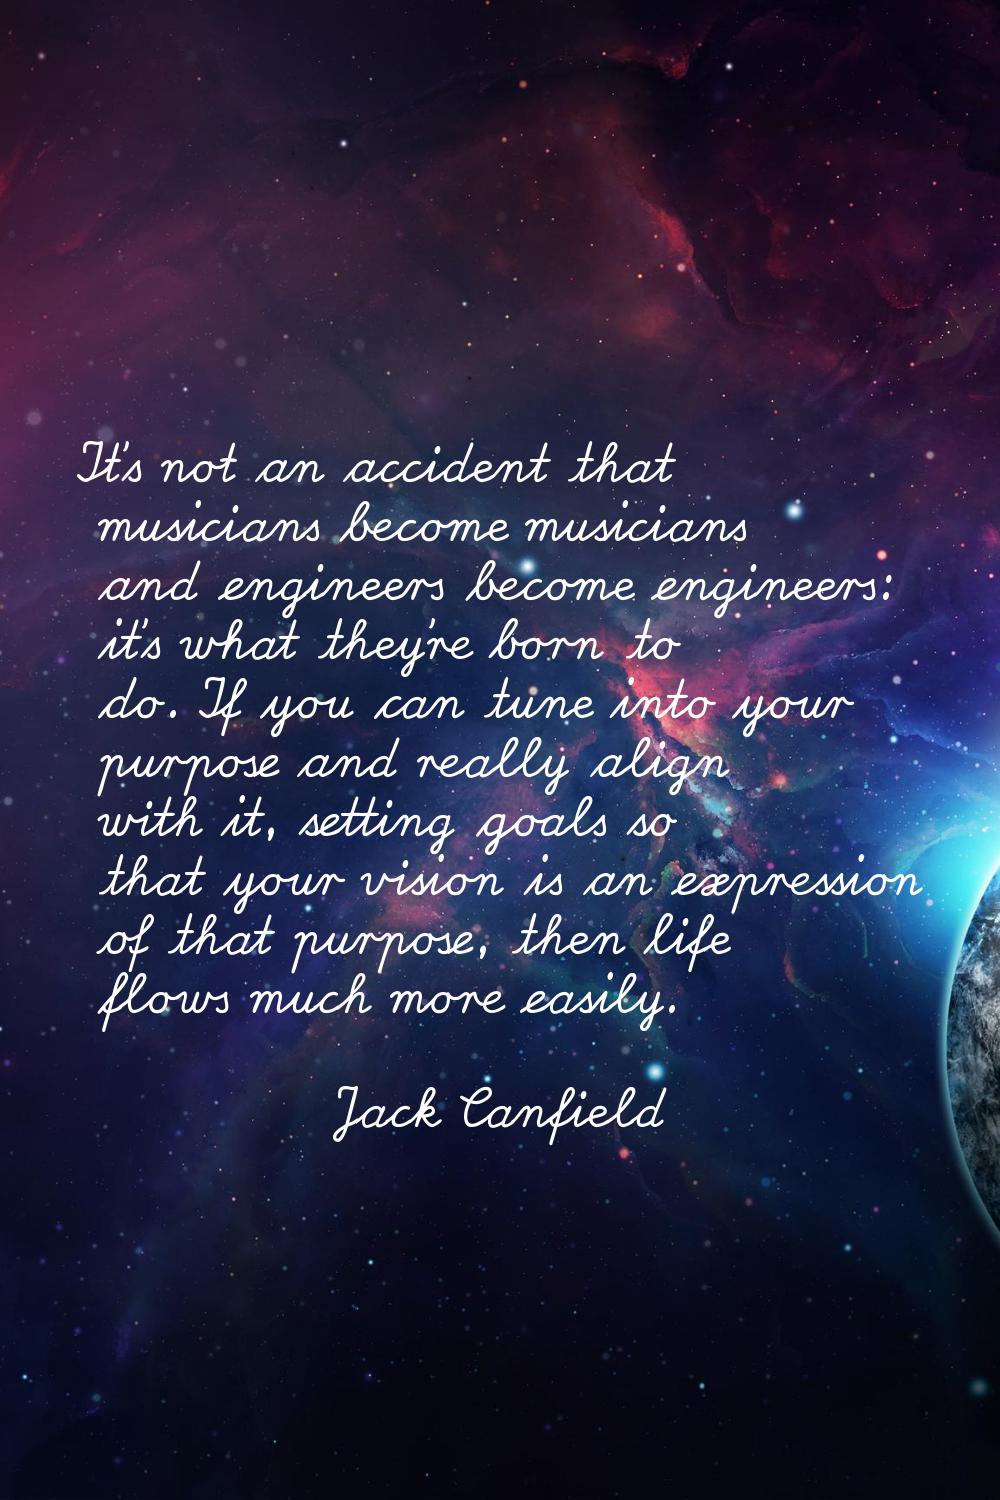 It's not an accident that musicians become musicians and engineers become engineers: it's what they